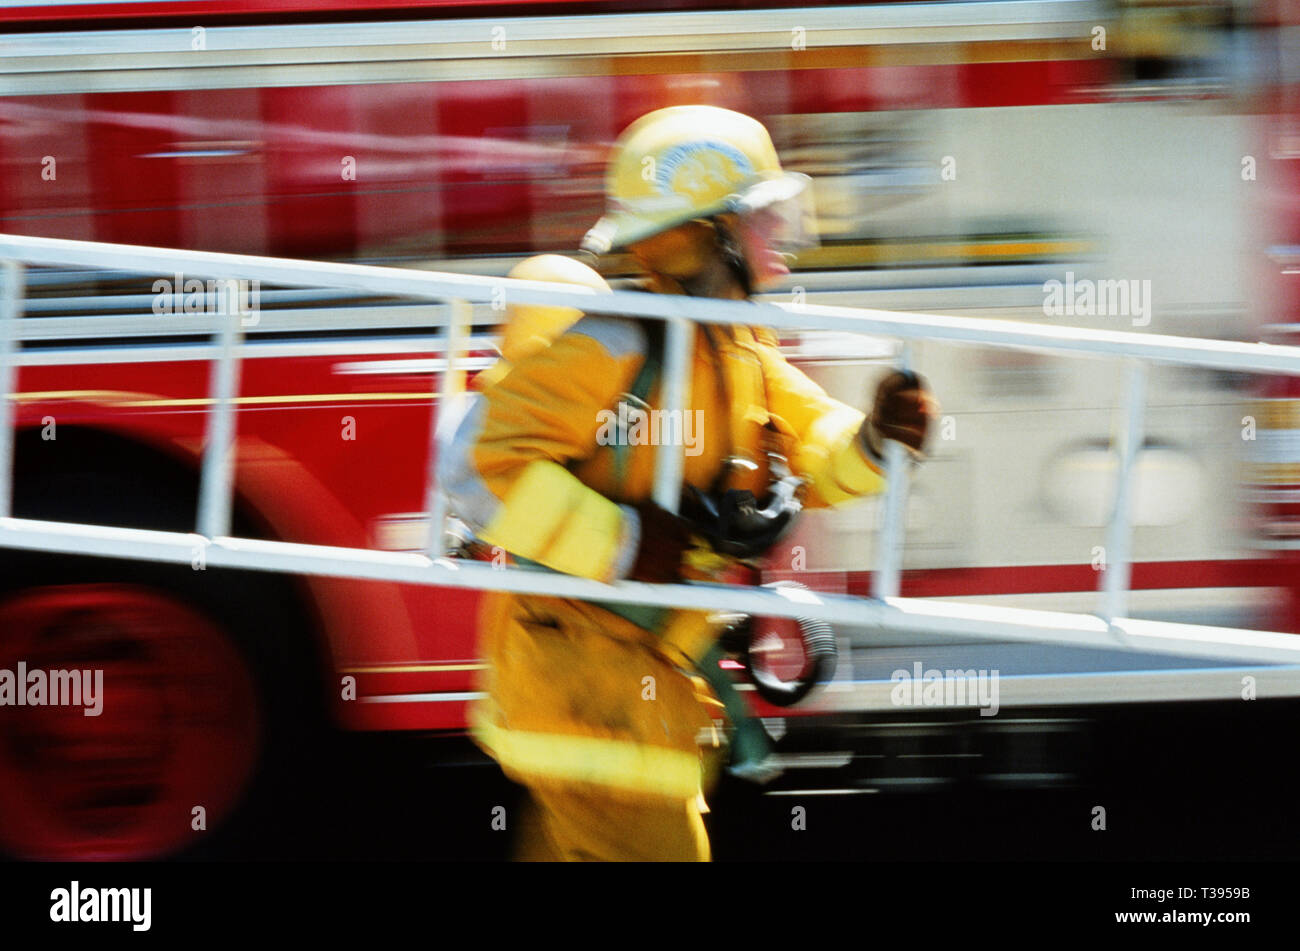 A fireman in full turnouts is carrying a ladder at a fire site, USA Stock Photo